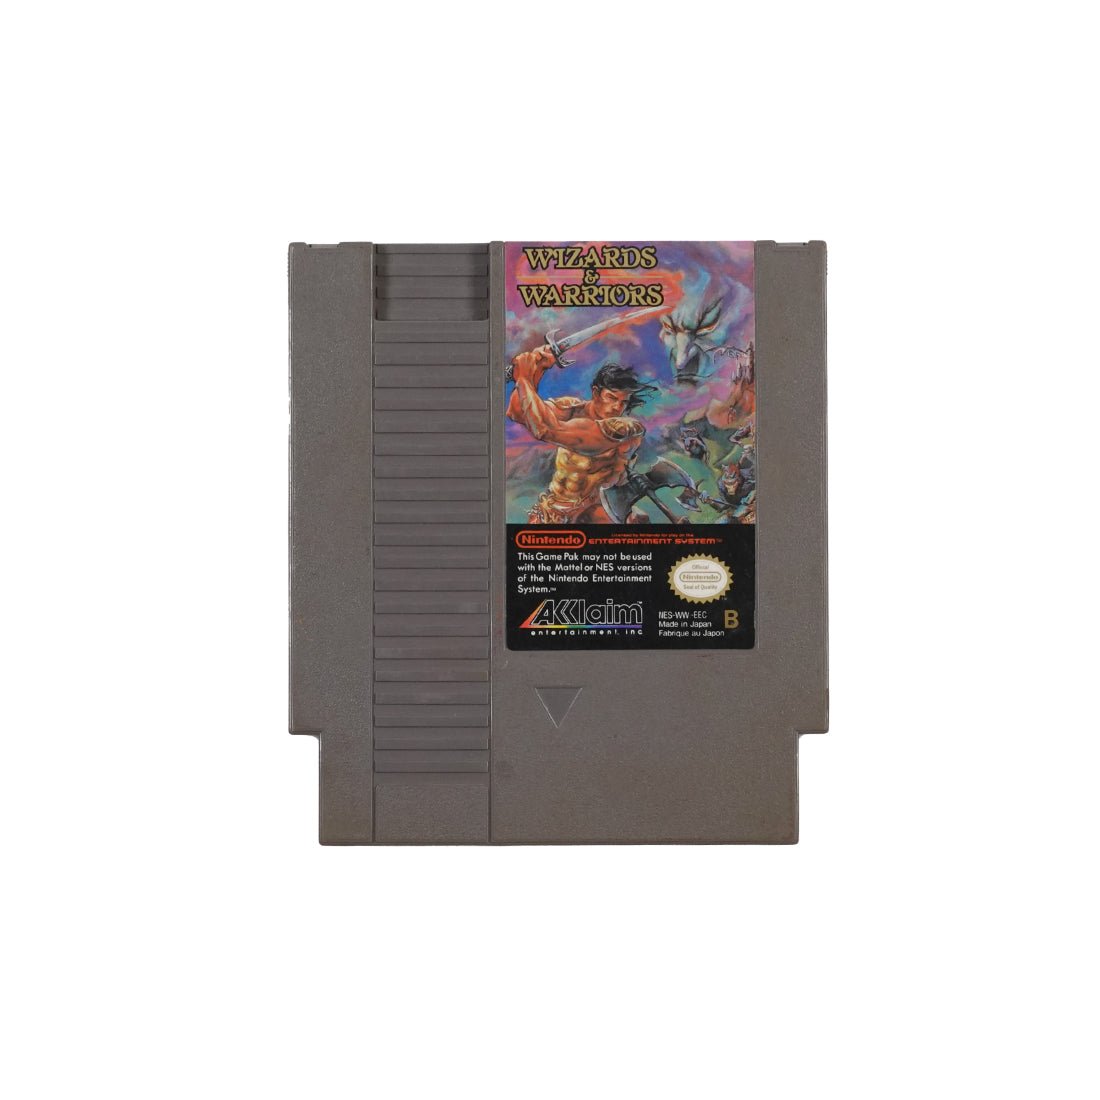 (Pre-Owned) Wizards & Warriors - Nintendo Entertainment System - Store 974 | ستور ٩٧٤